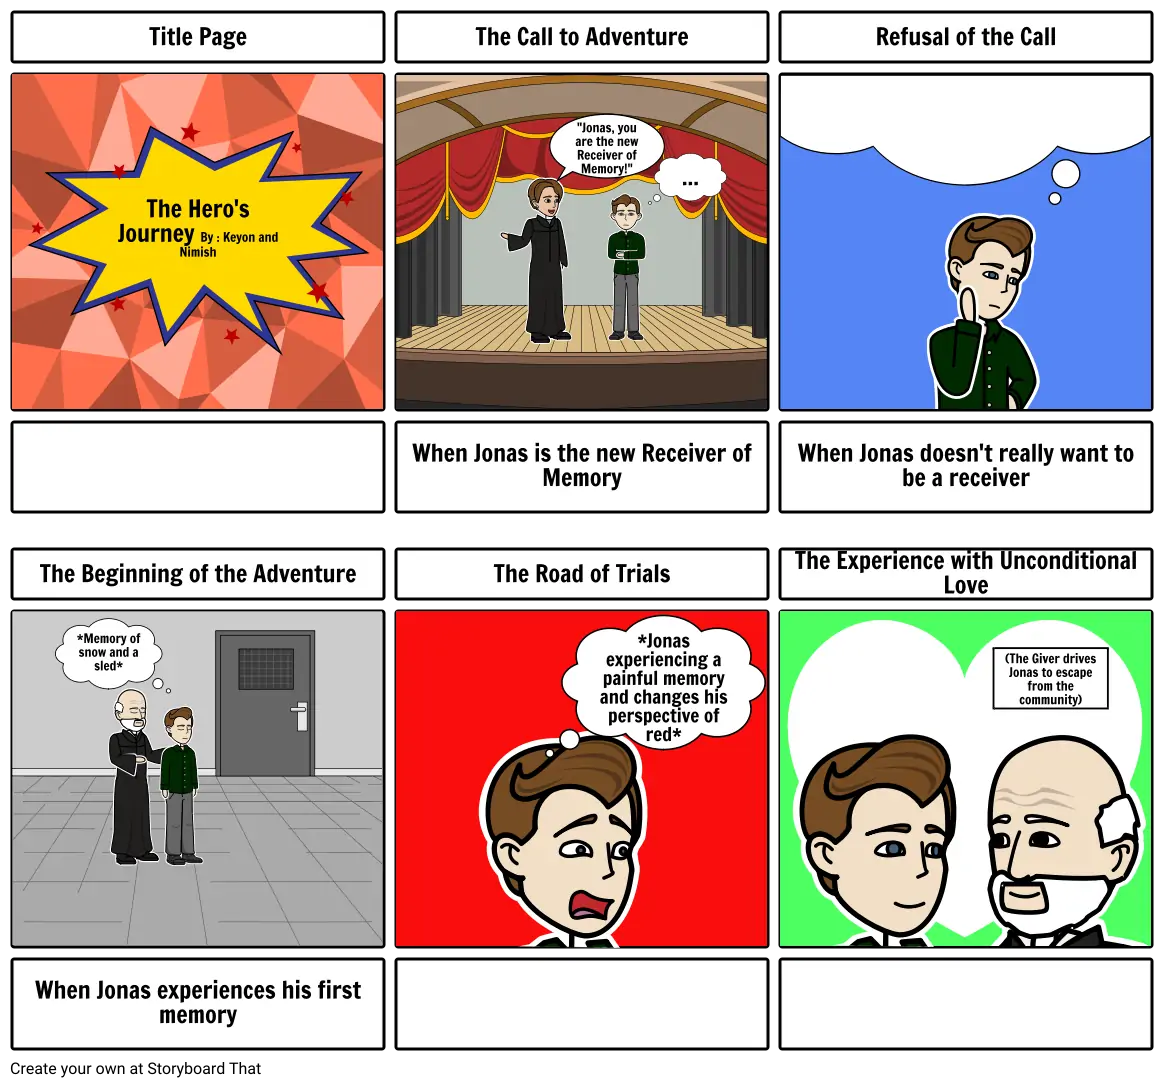 The Hero&#39;s Journey (1-5) By: Keyon and Nimish